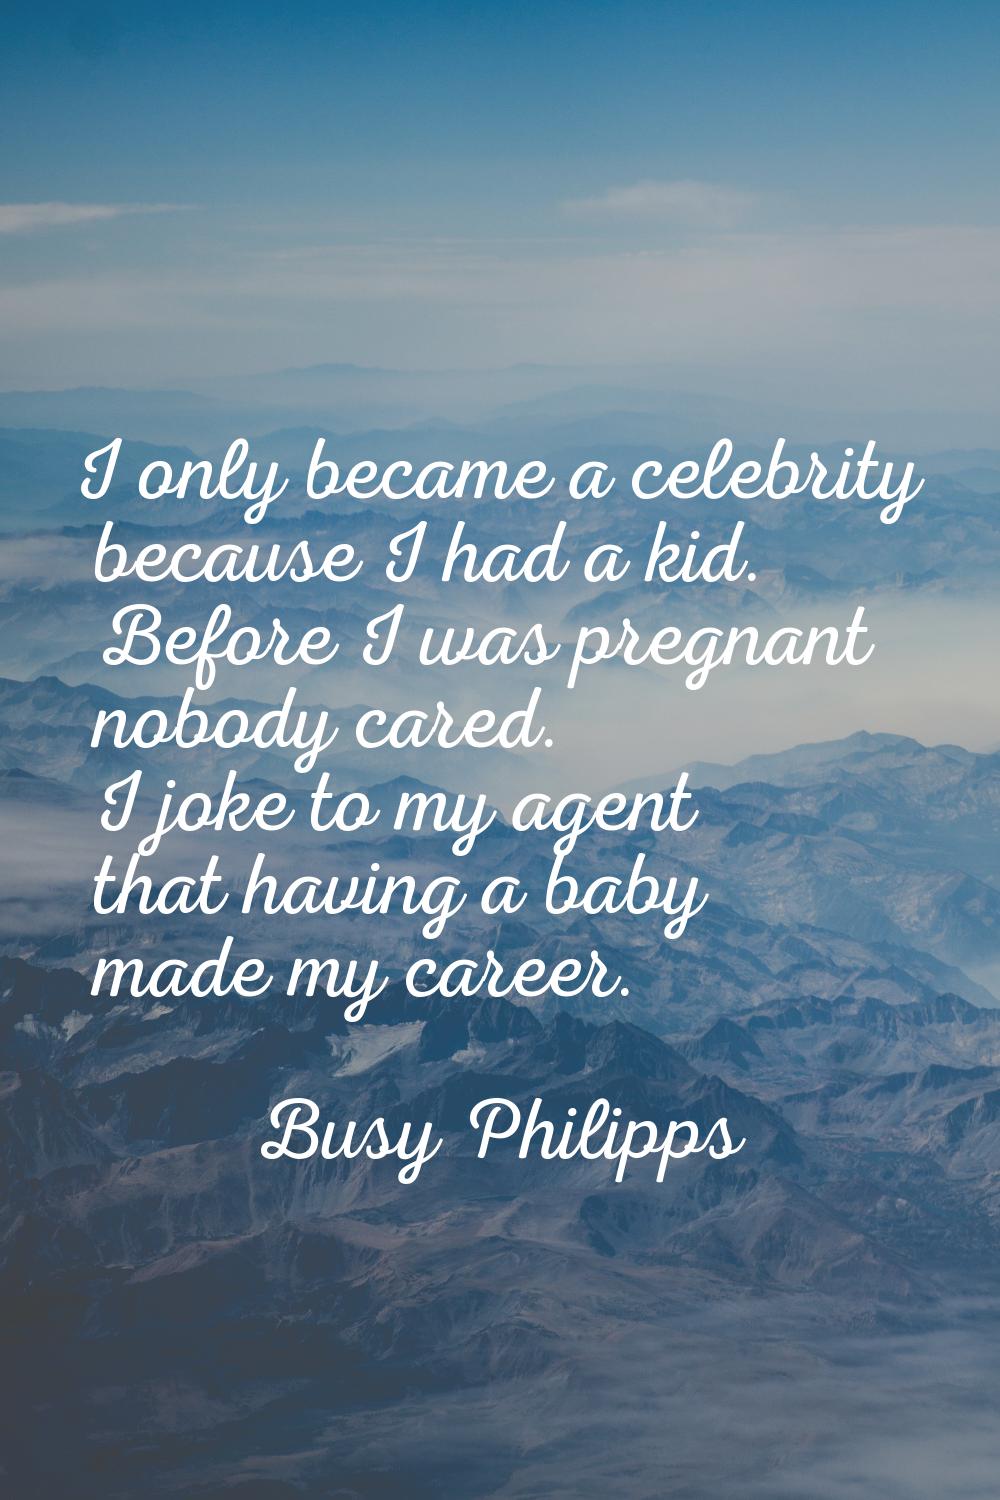 I only became a celebrity because I had a kid. Before I was pregnant nobody cared. I joke to my age